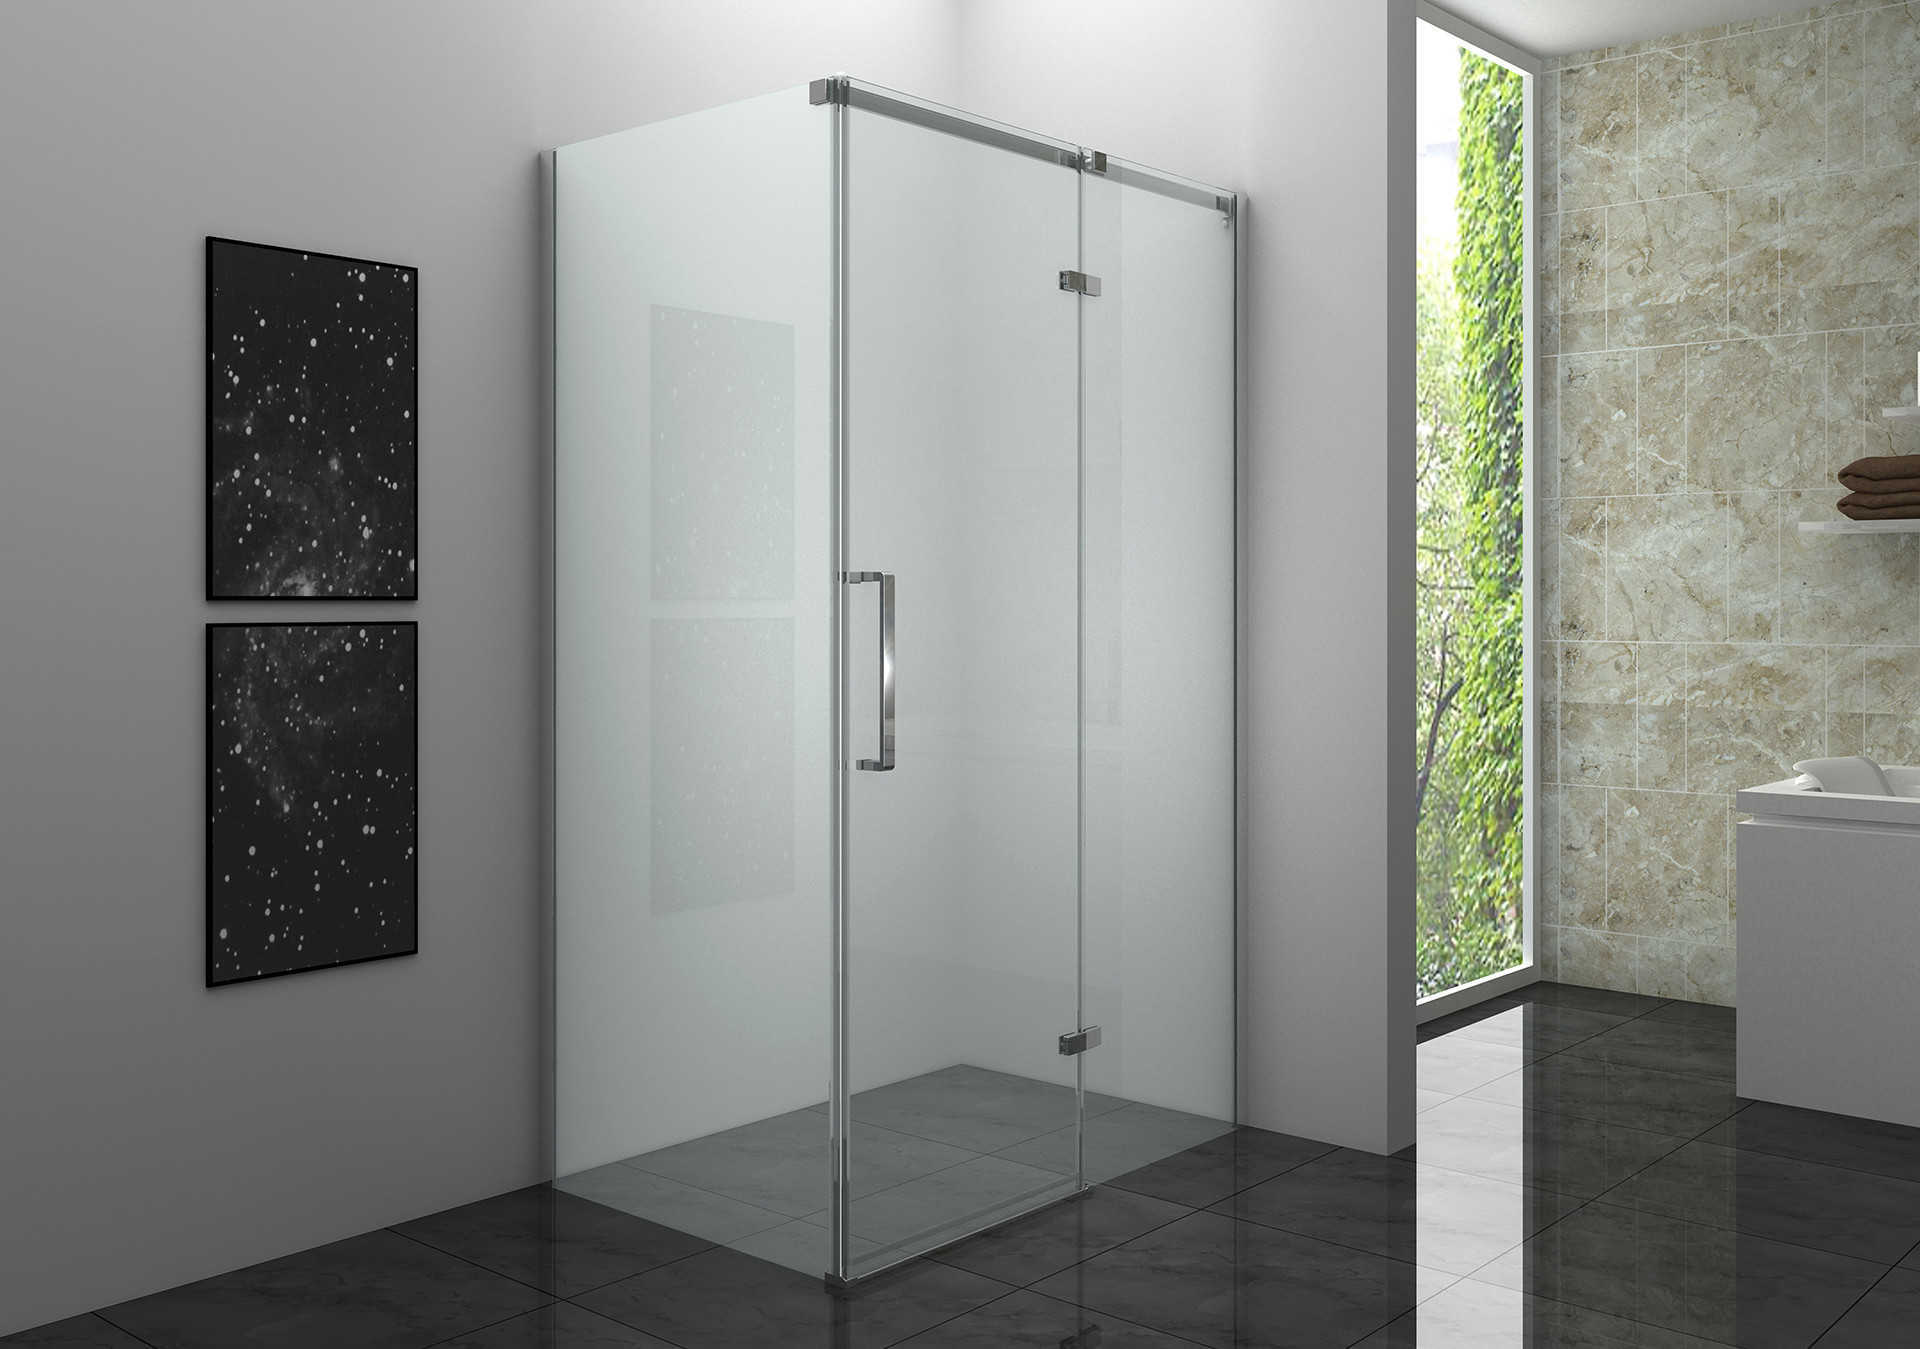 A corner double door quadrant shower enclosure is a type of shower enclosure designed to fit into the corner of a bathroom